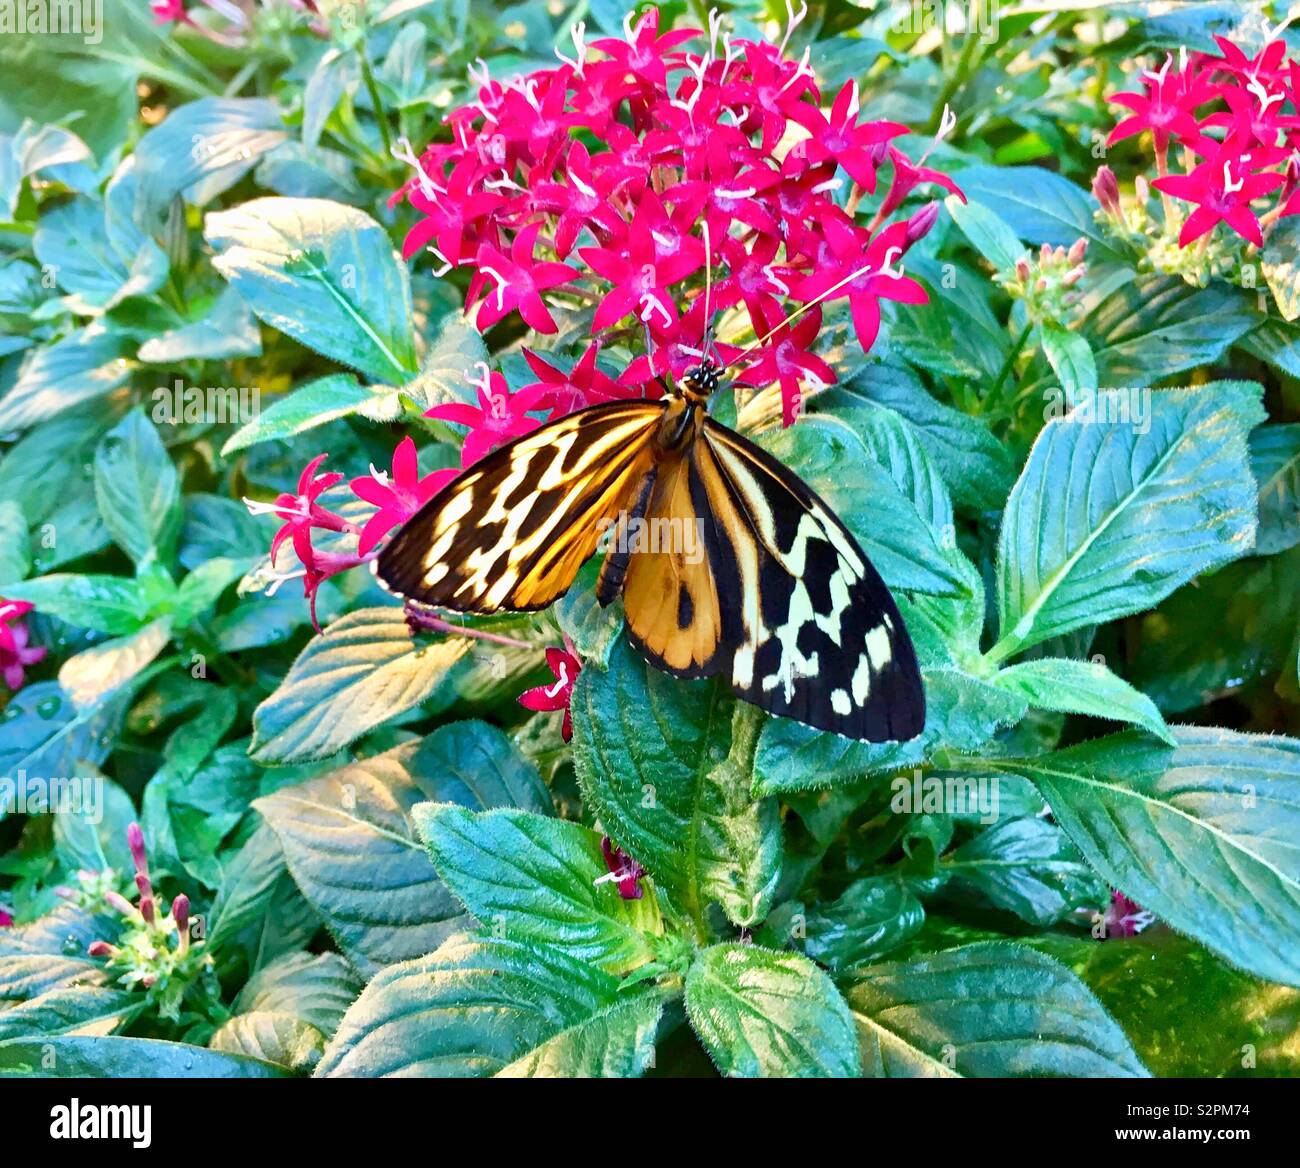 Orange black and white butterfly perched on red star flowers surrounded by green leaves Stock Photo